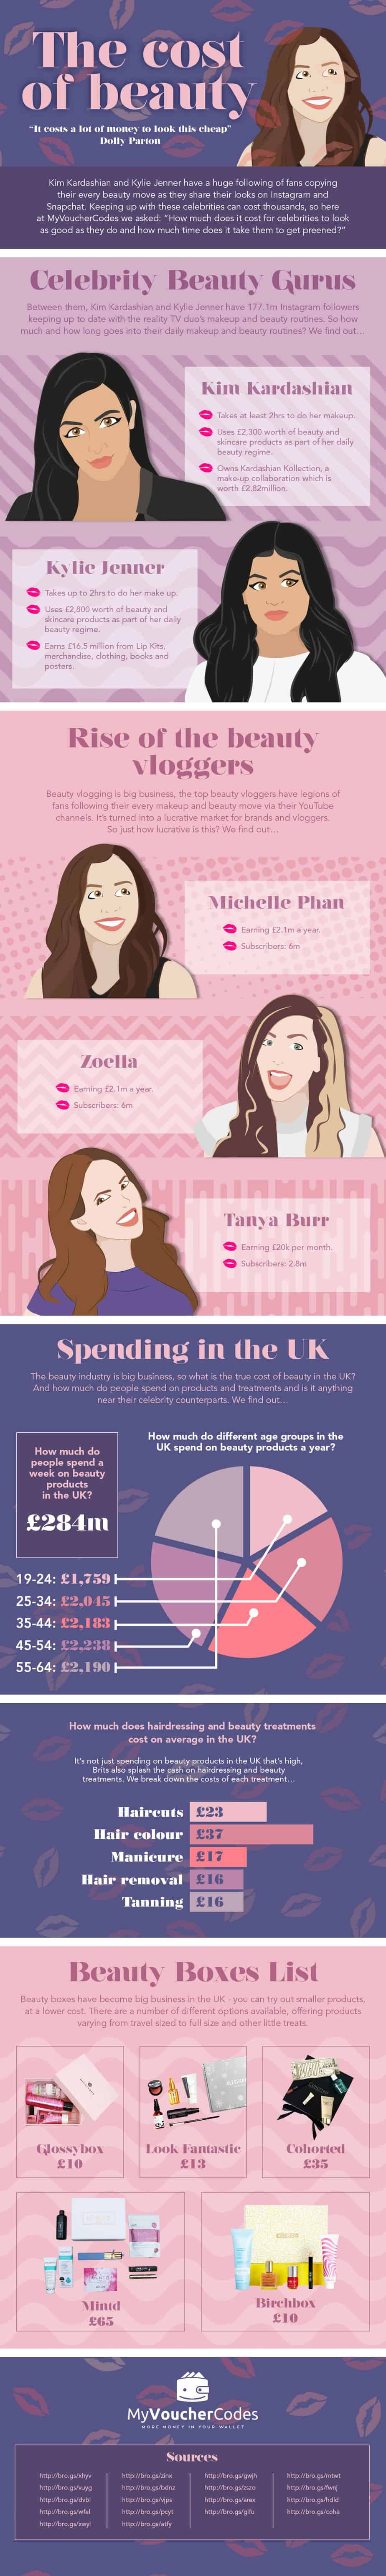 cost of beauty infographic